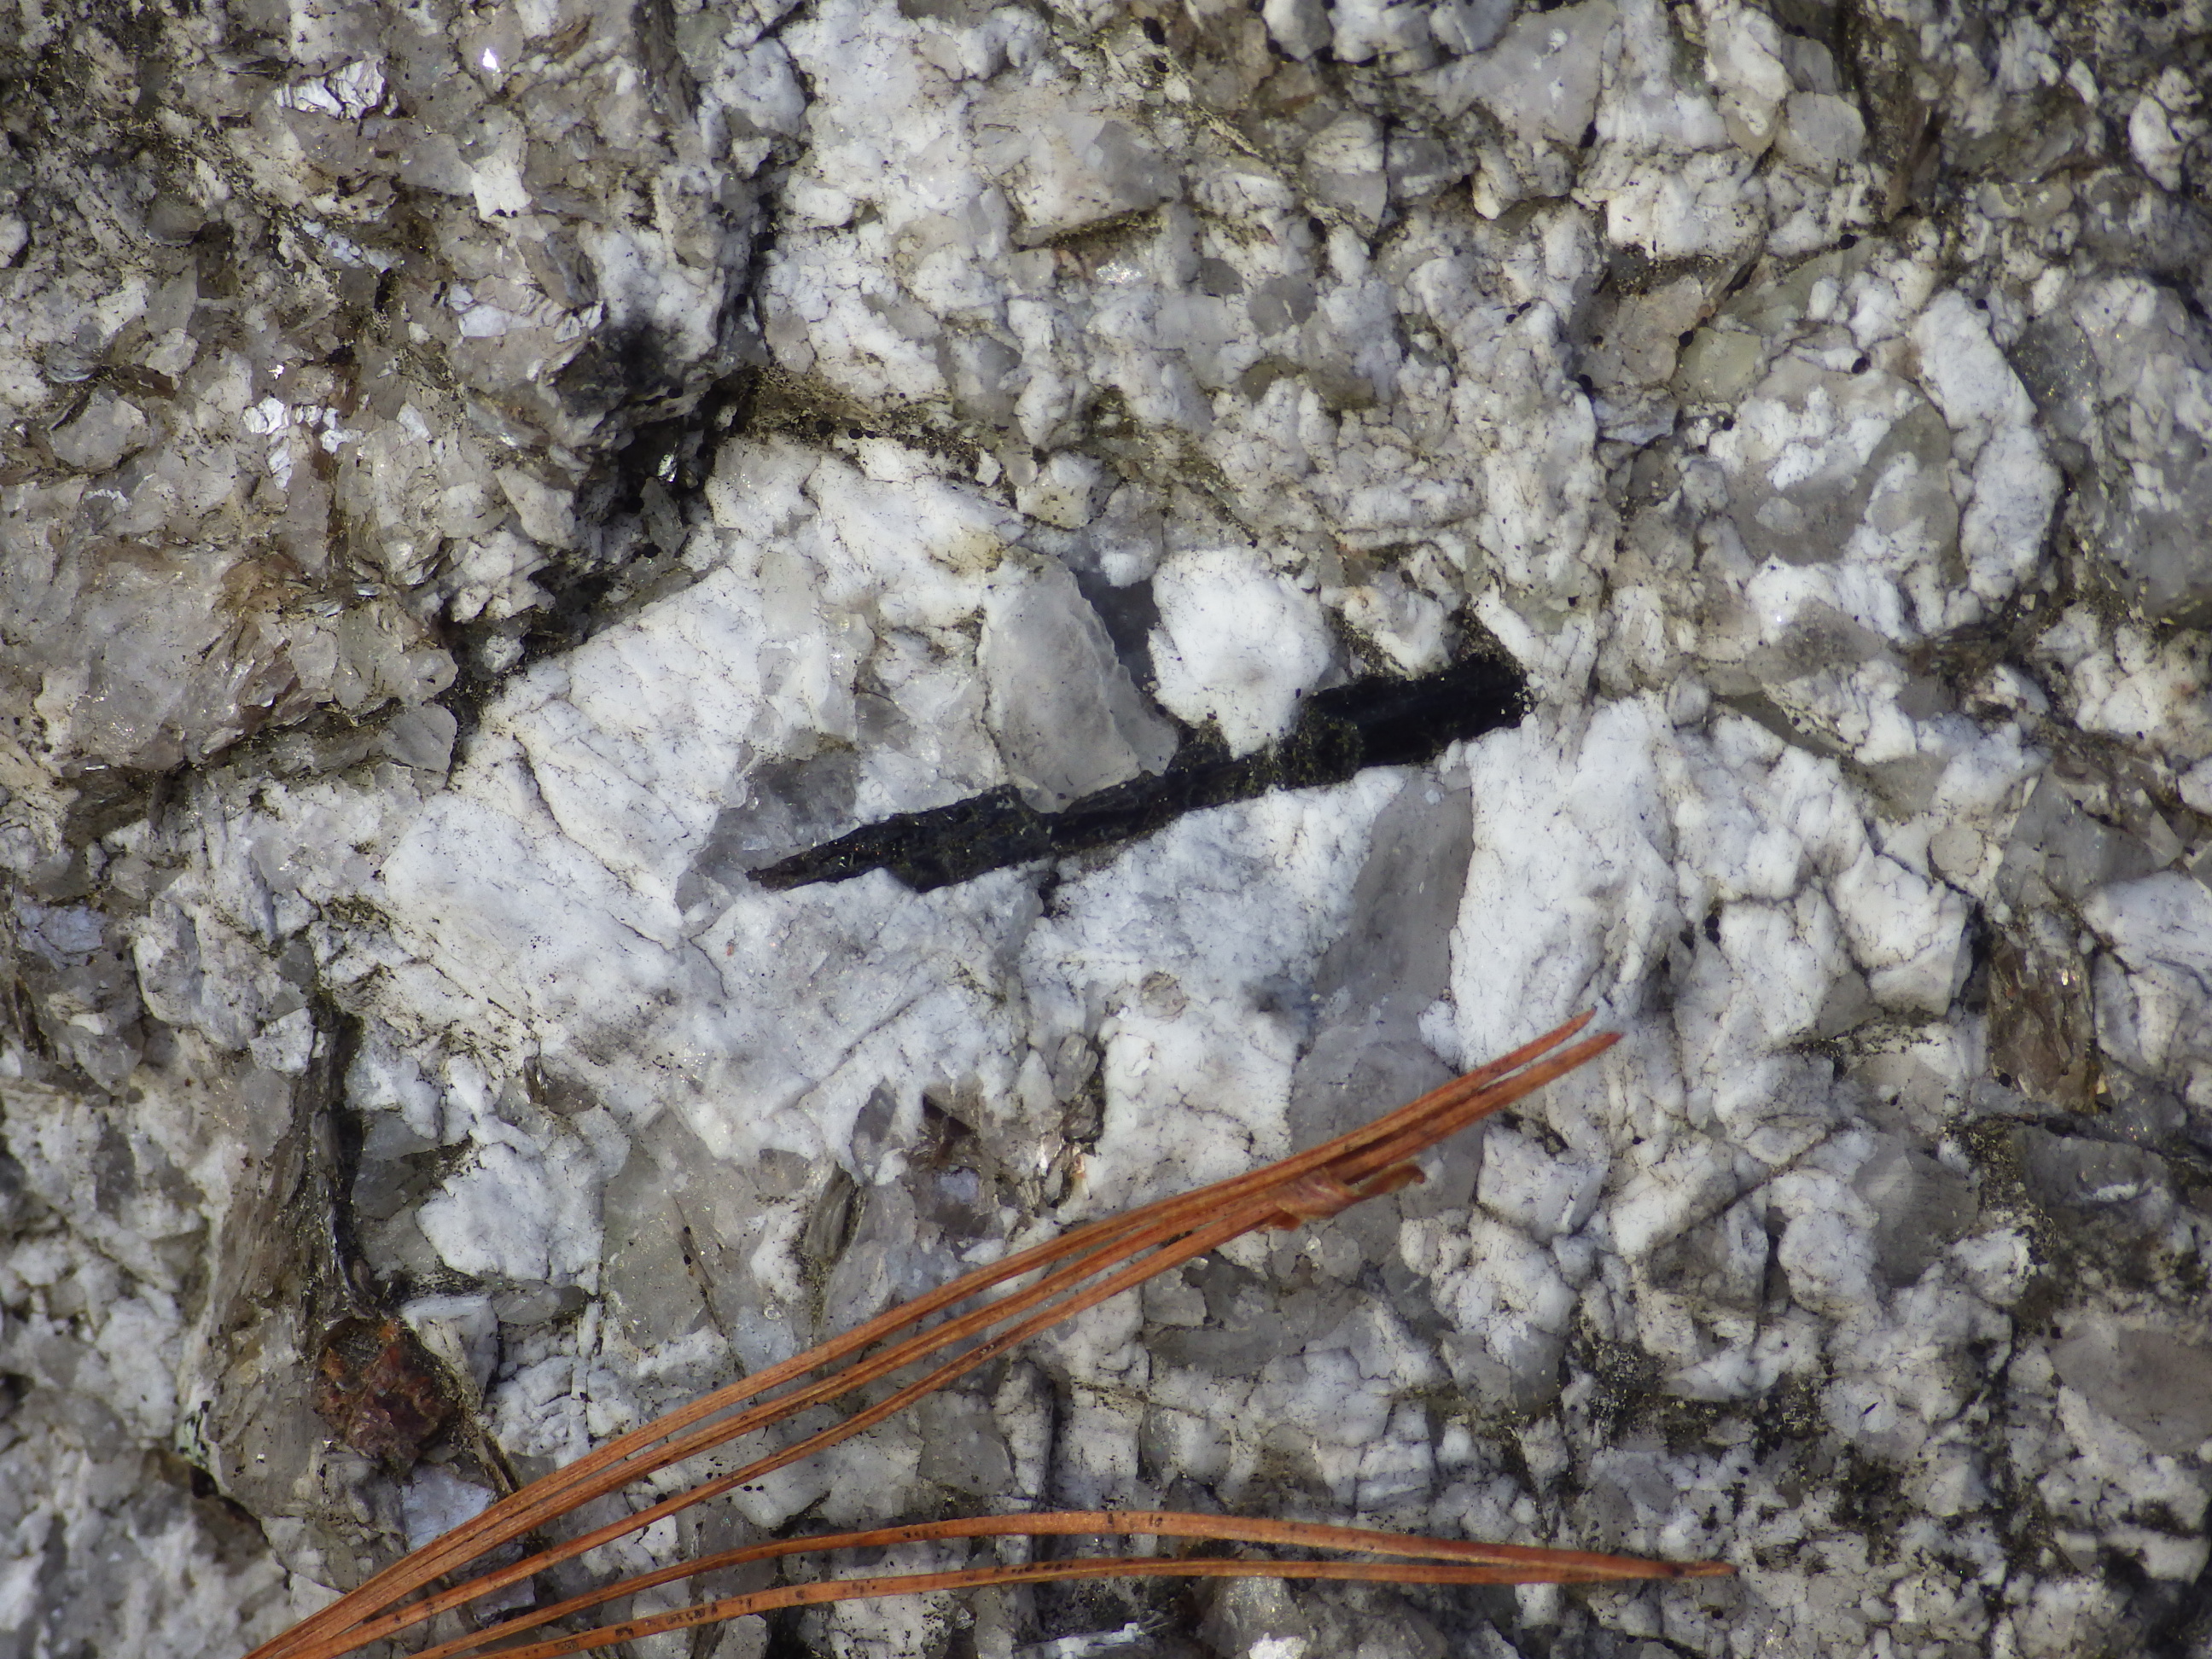 The state rock in granitic pegmatite. Photo by Henry Berry and the Maine Geological Survey